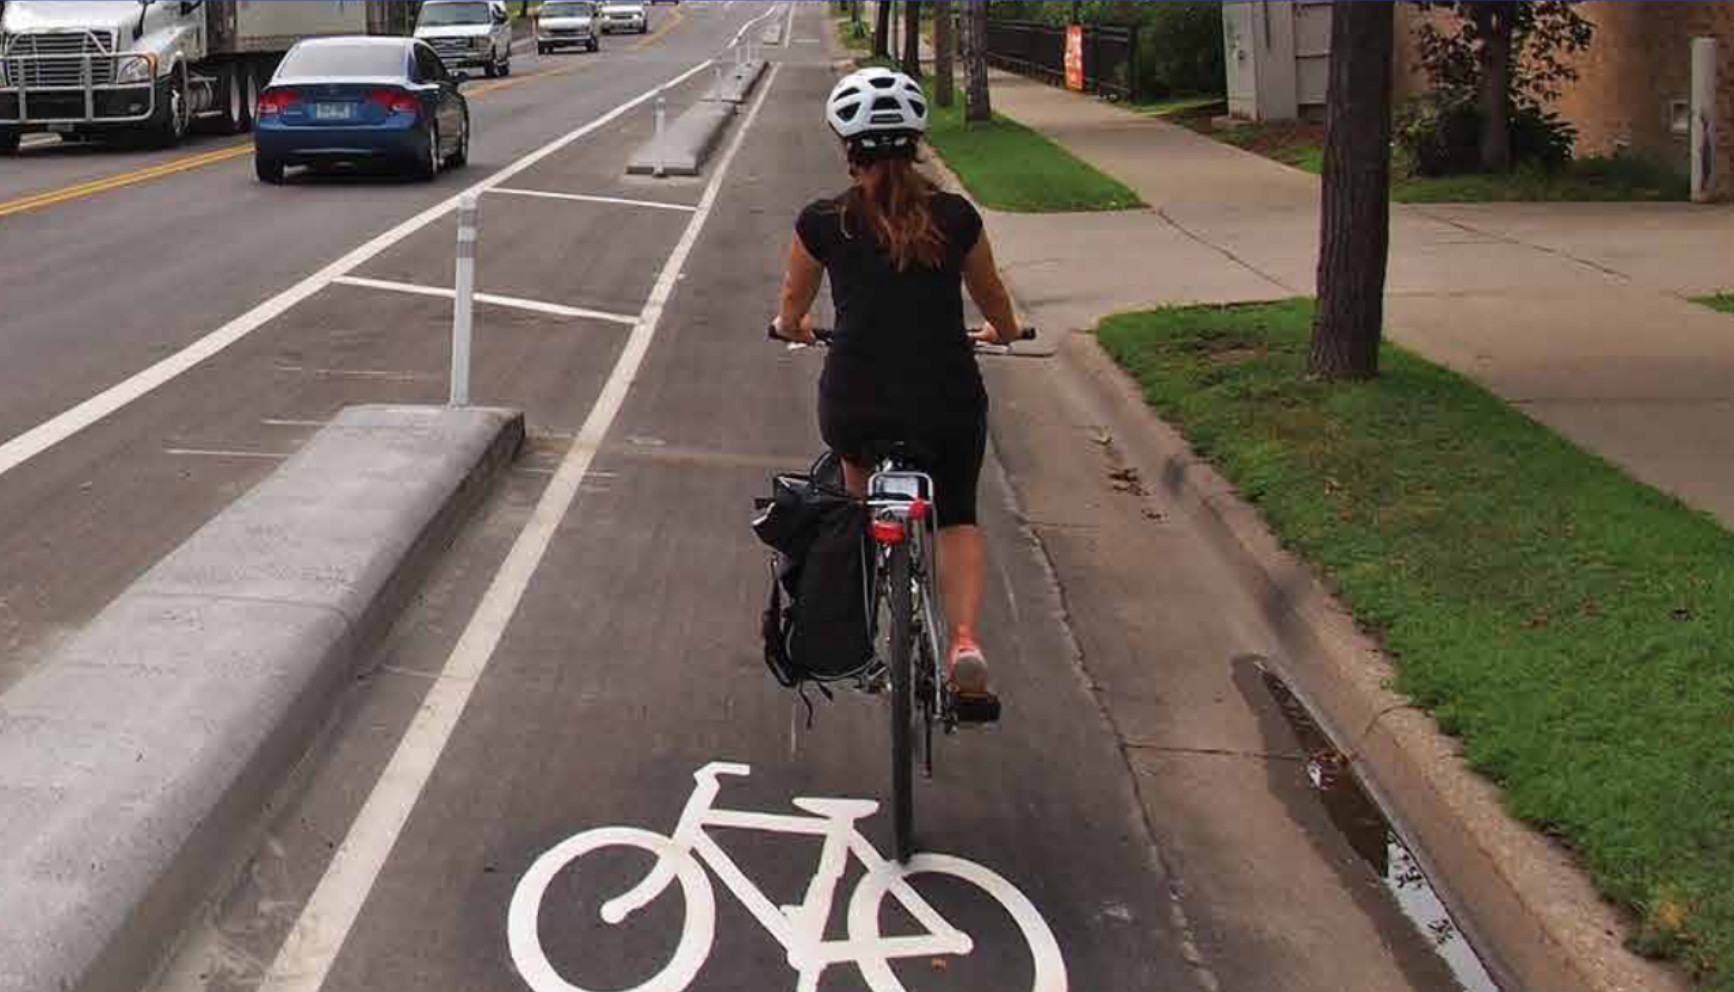 A person rides their bike in a protected bike lane.